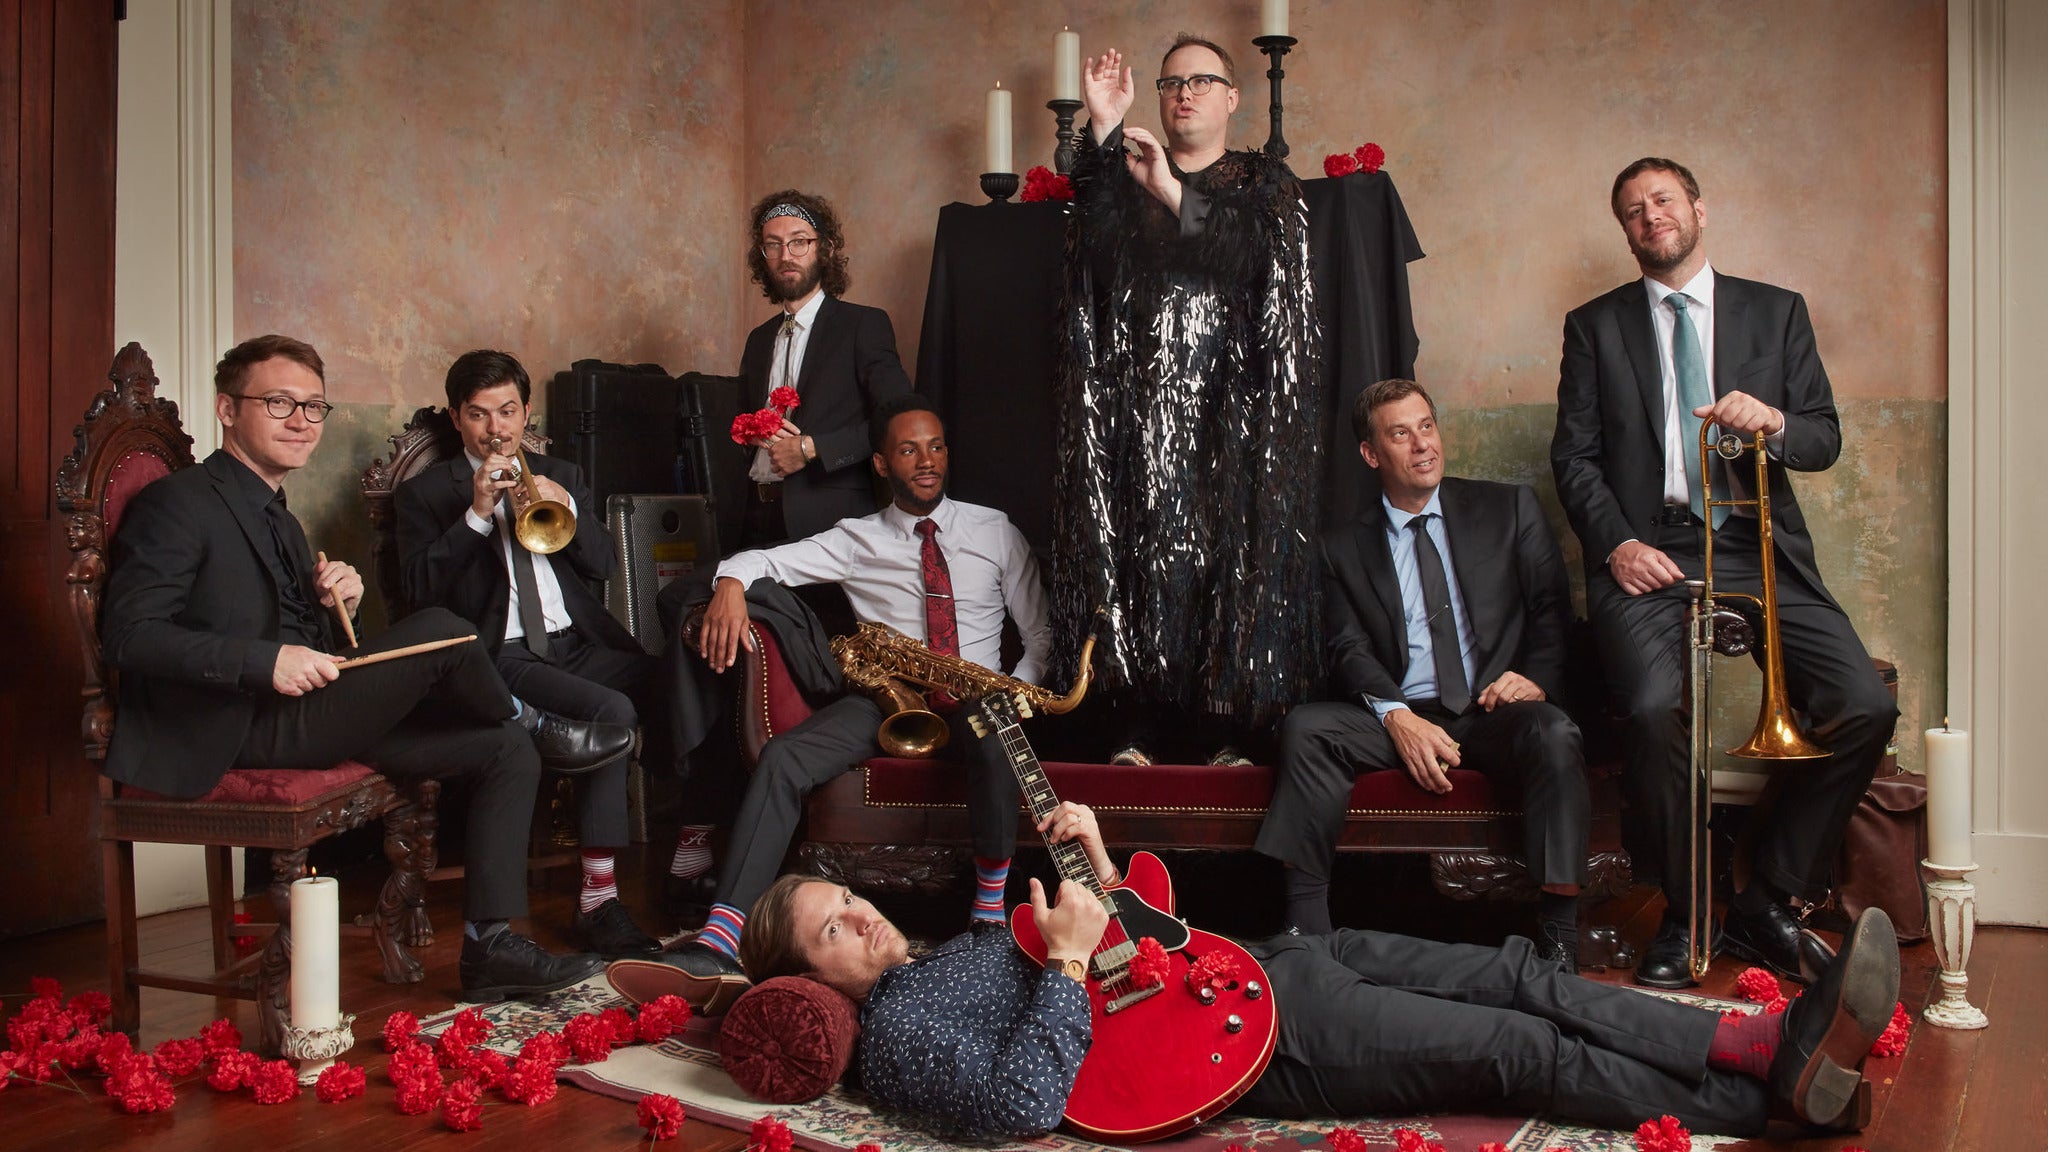 St. Paul and the Broken Bones in North Myrtle Beach promo photo for Live Nation presale offer code